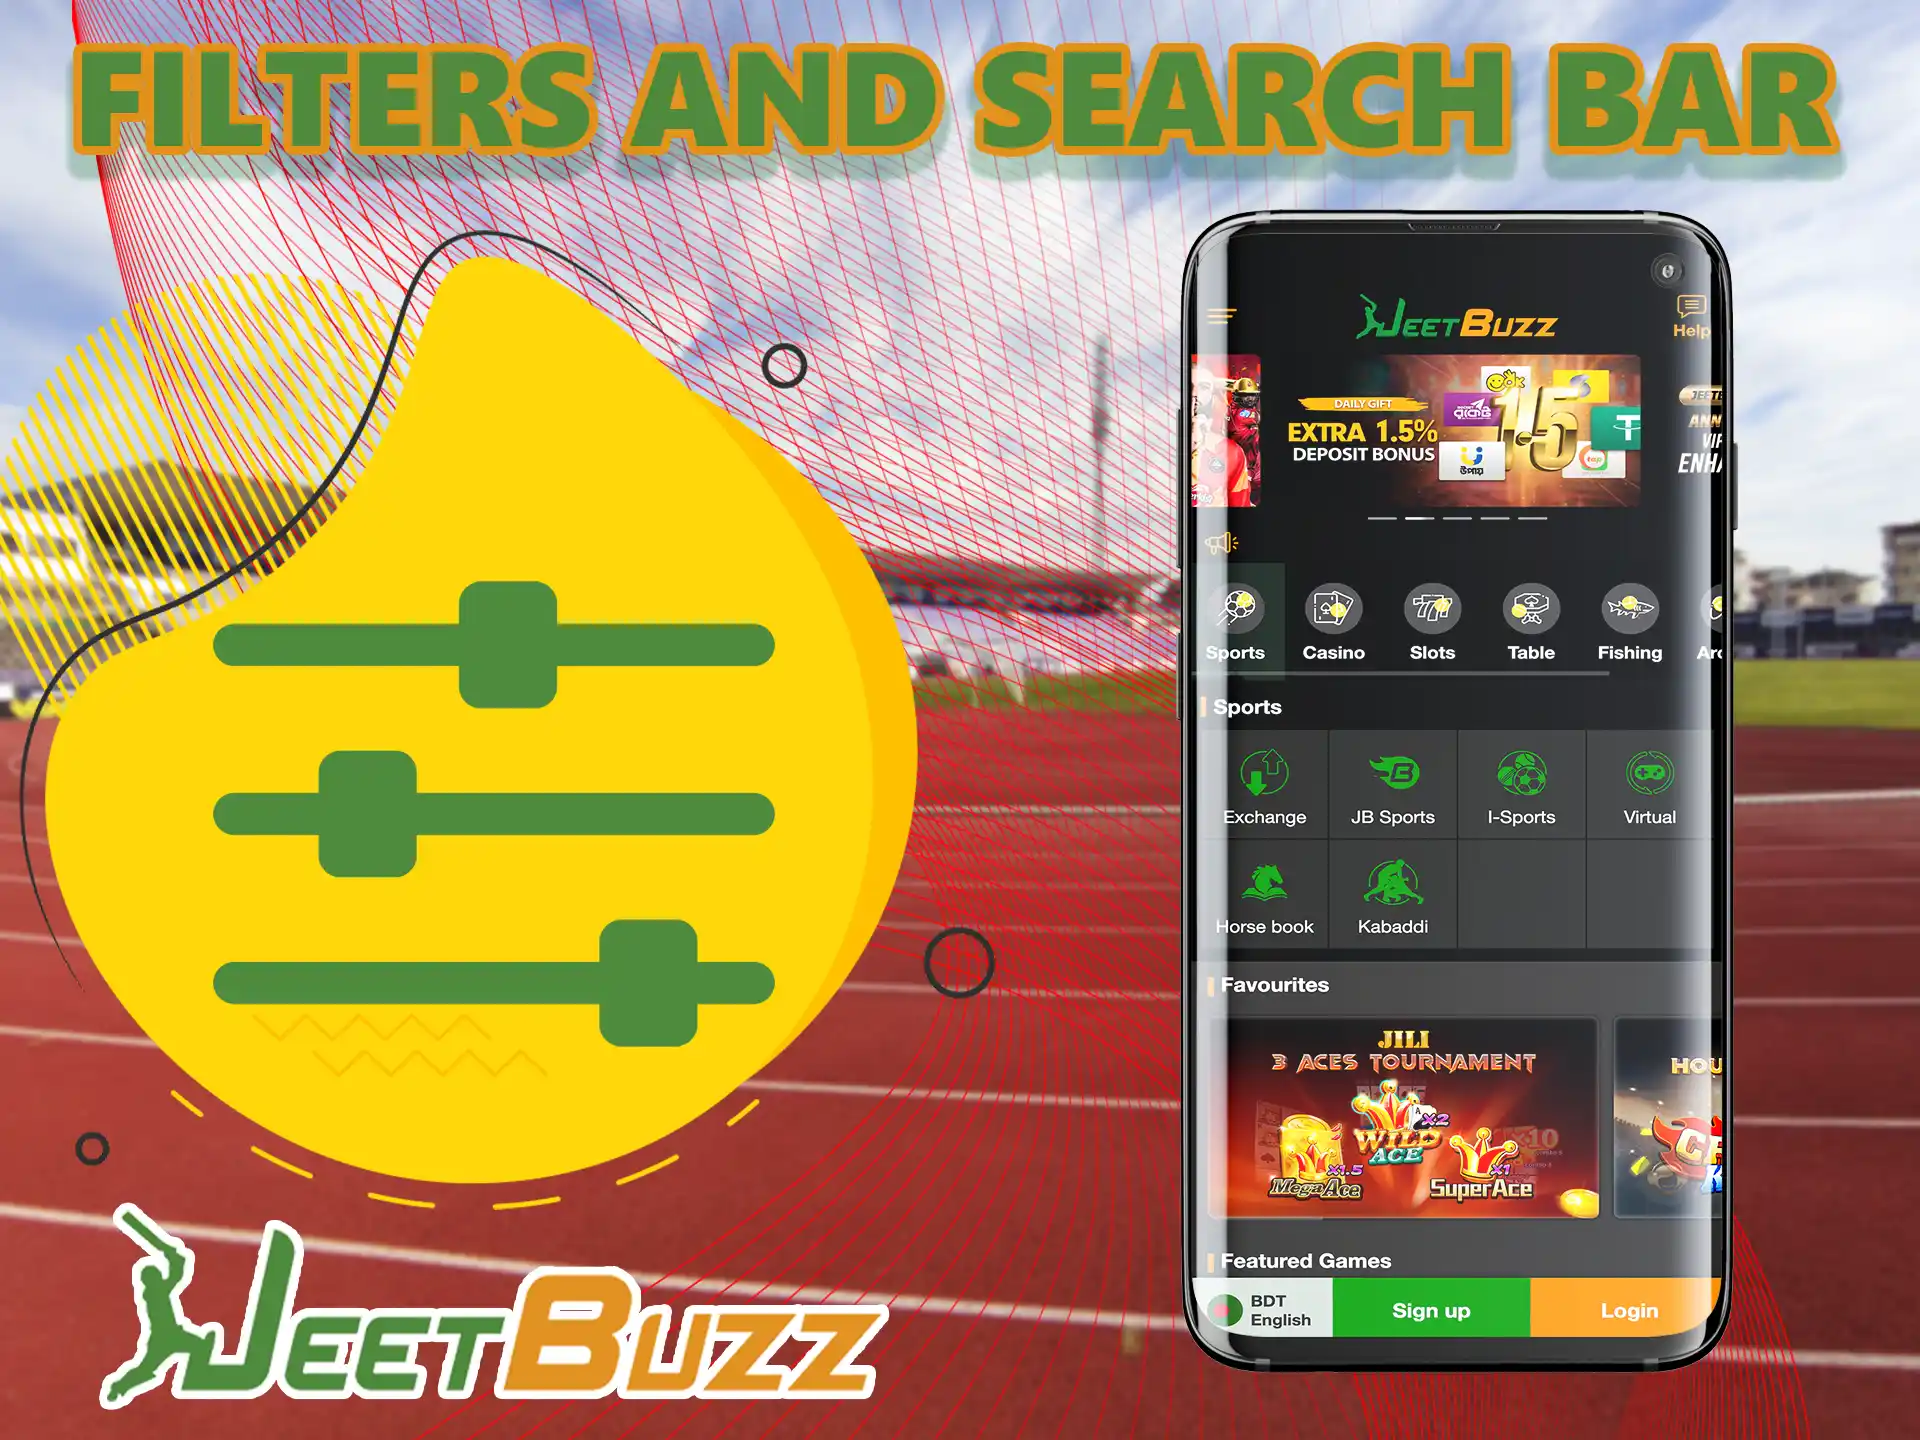 To ensure that the player can always find the right entertainment for him, the app provides special JeetBuzz tools.